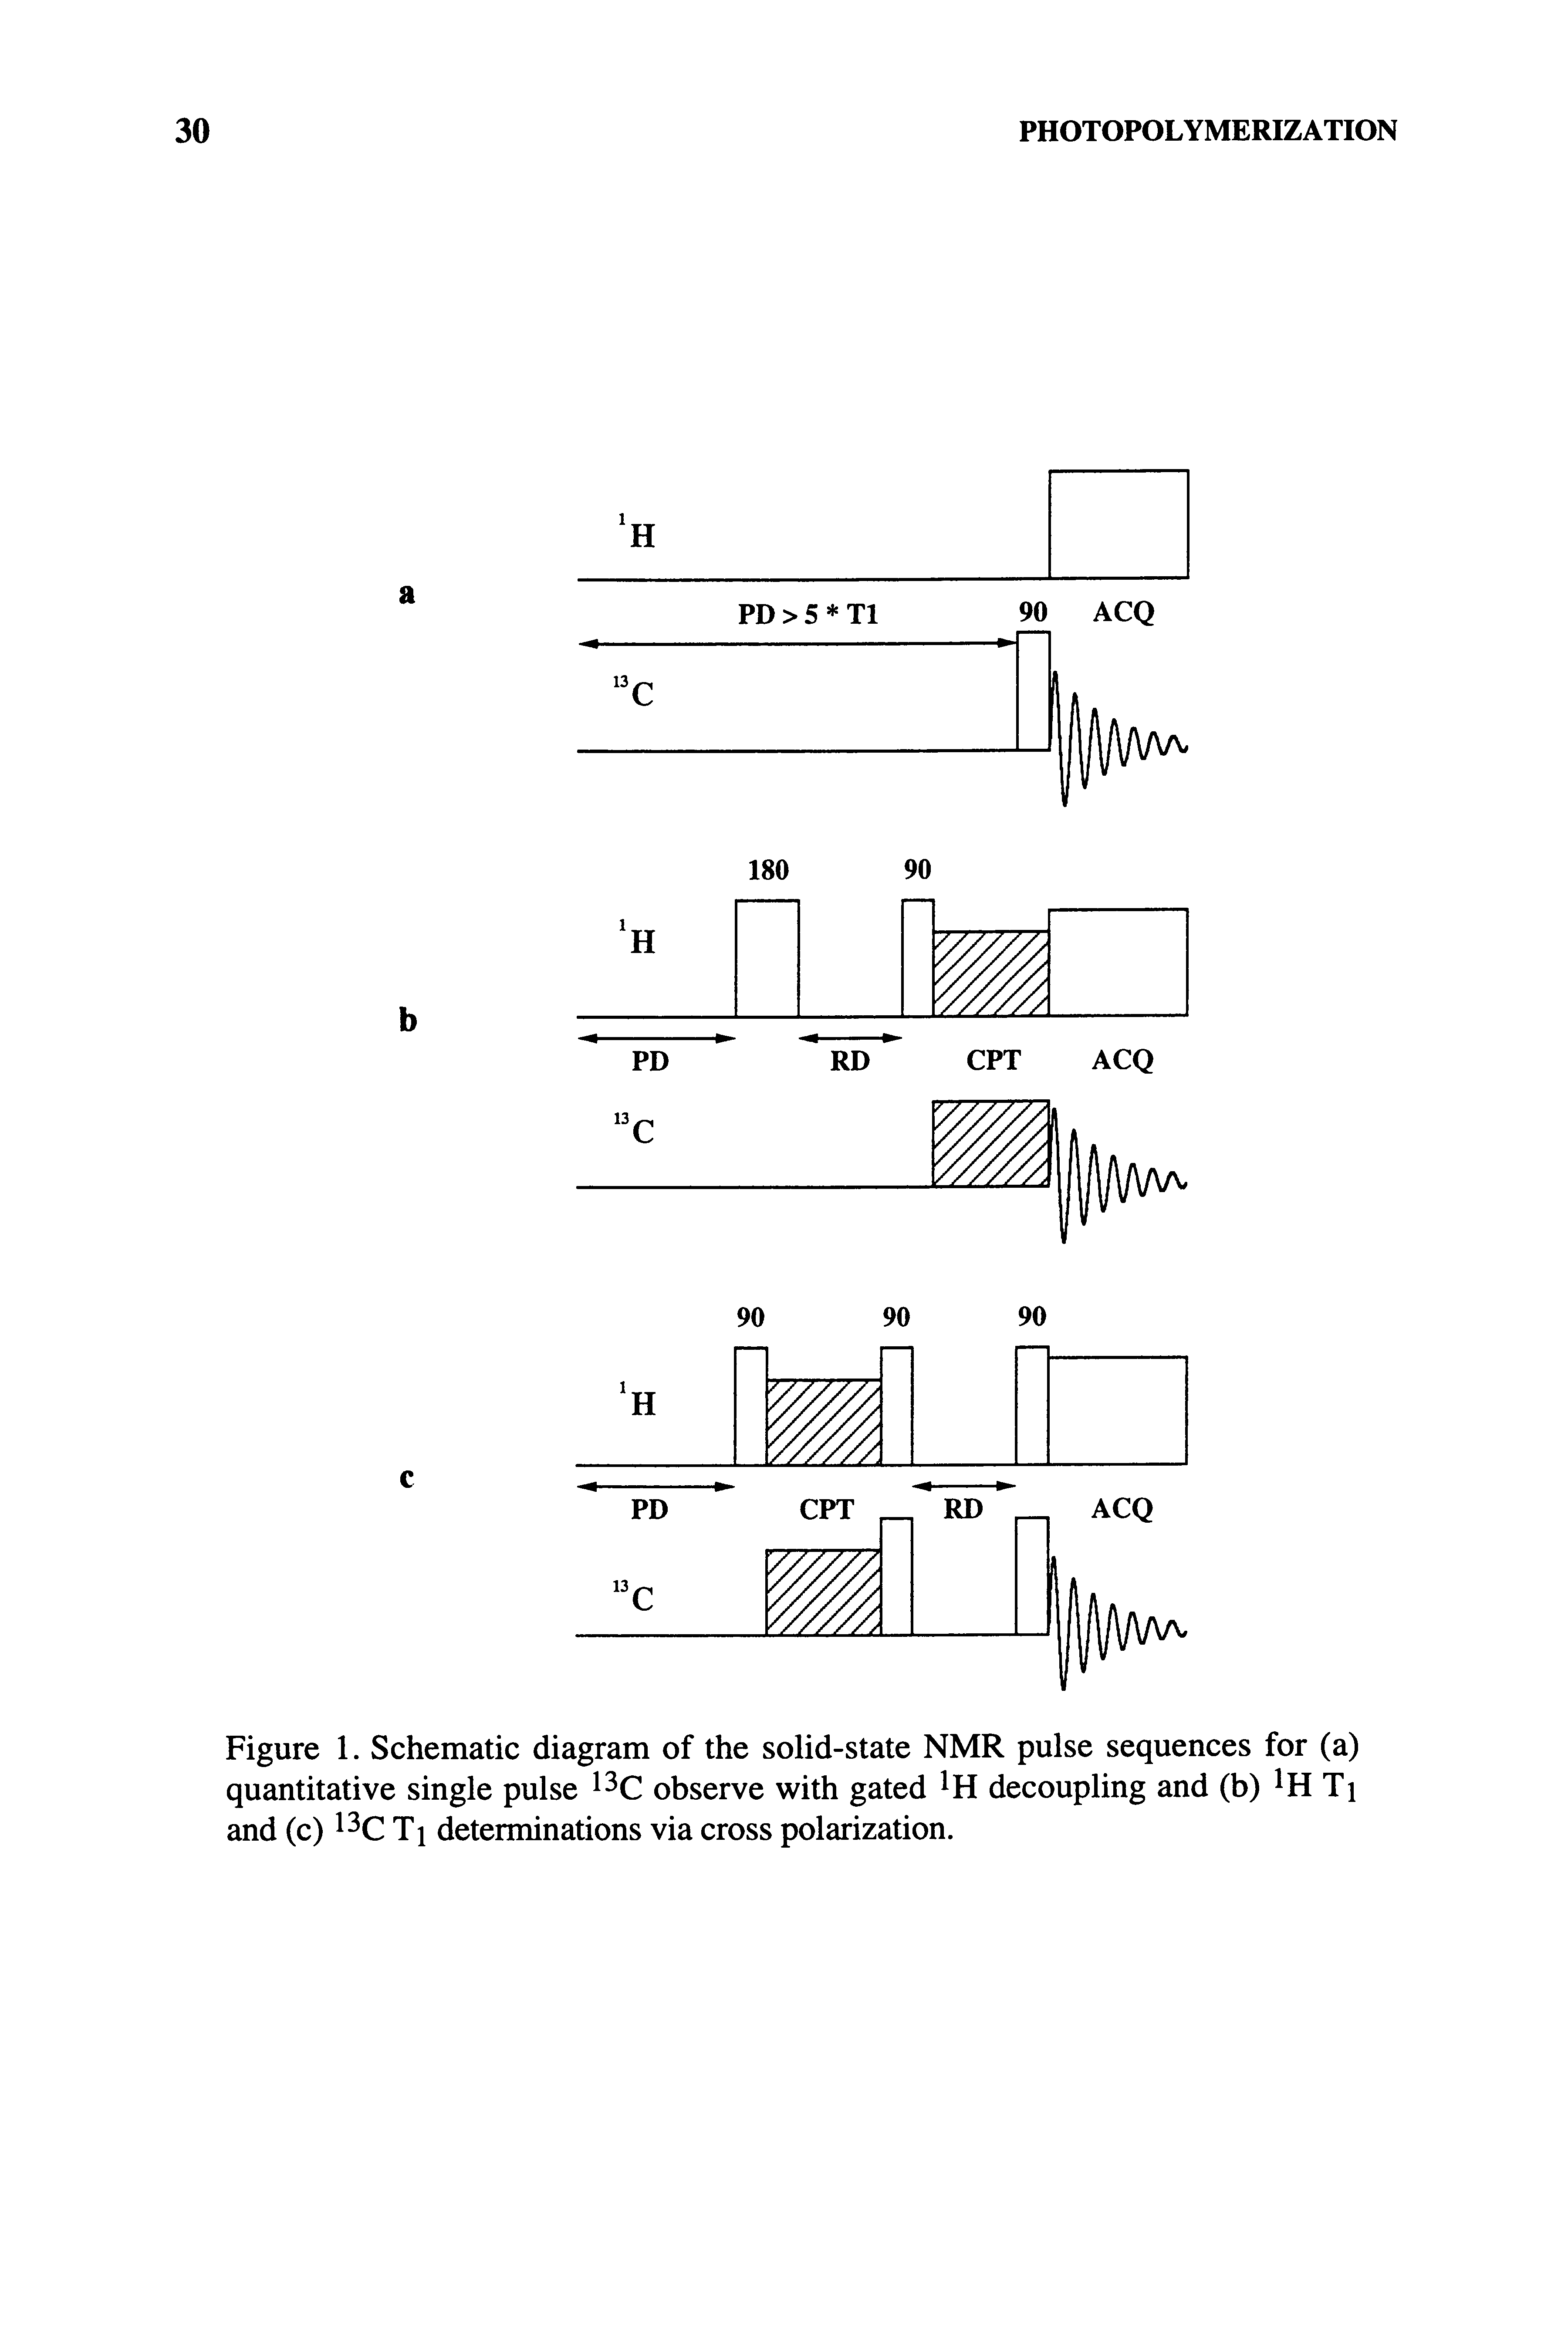 Figure 1. Schematic diagram of the solid-state NMR pulse sequences for (a) quantitative single pulse 13C observe with gated decoupling and (b) Ti and (c) 13C Ti determinations via cross polarization.